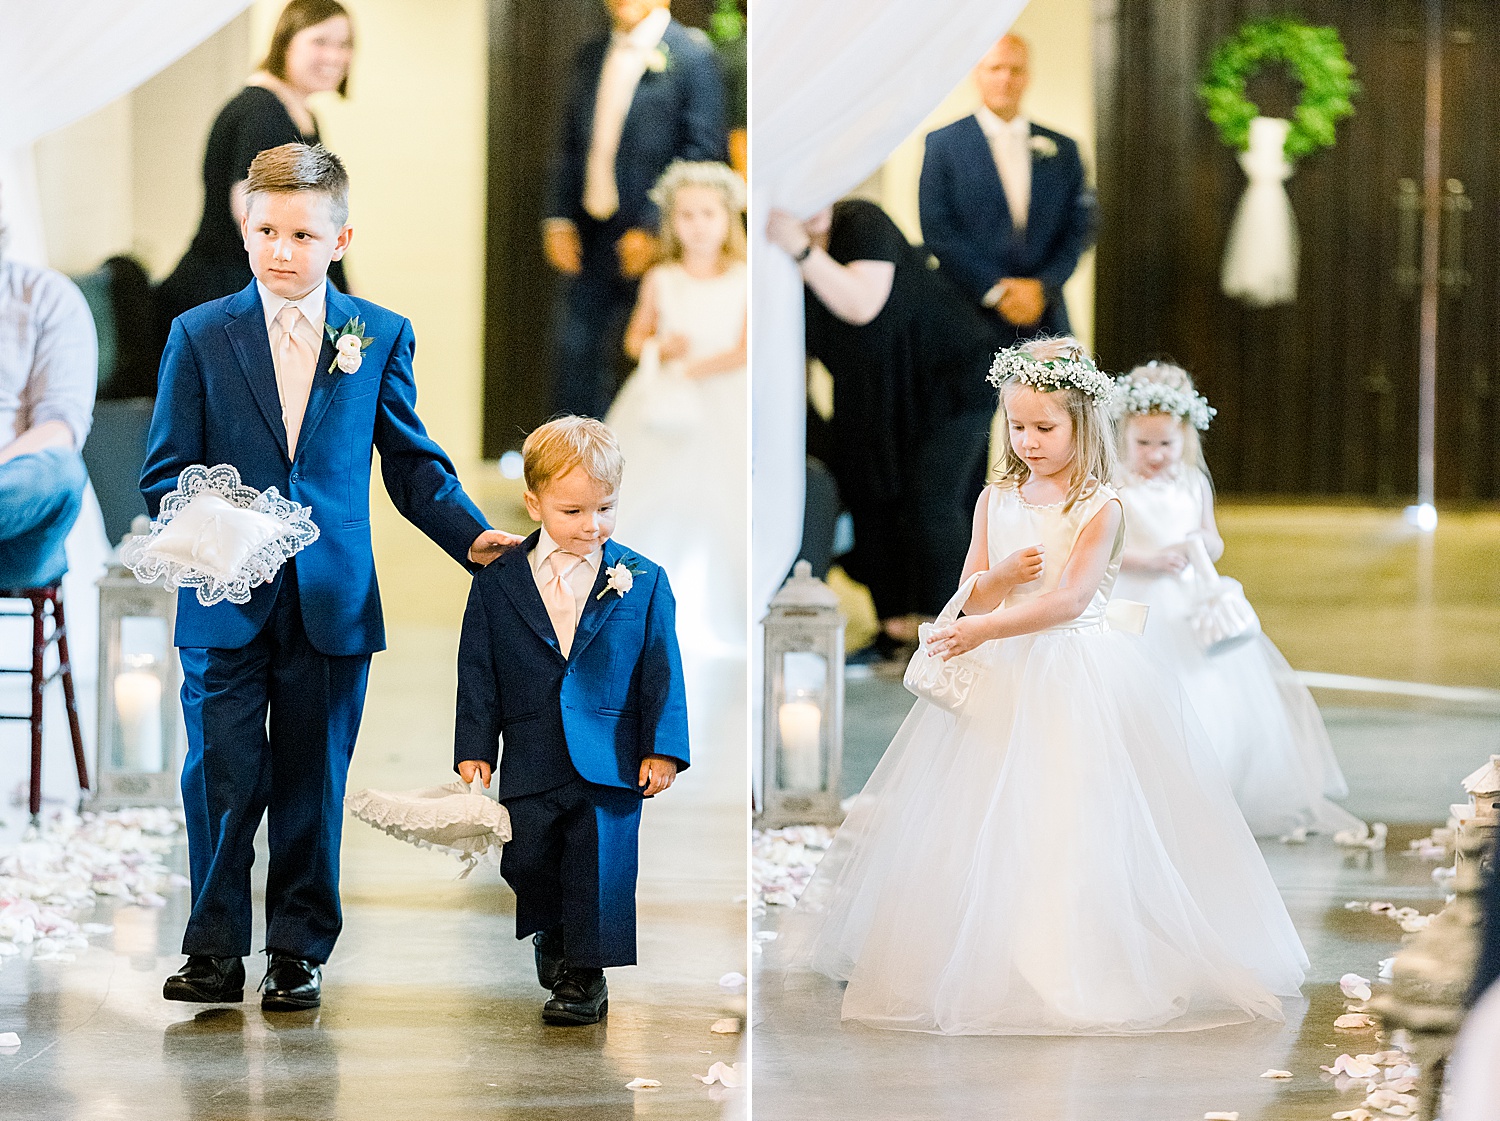 flower girls and ring bearers at The Barn at Shady Lane wedding in Birmingham, AL